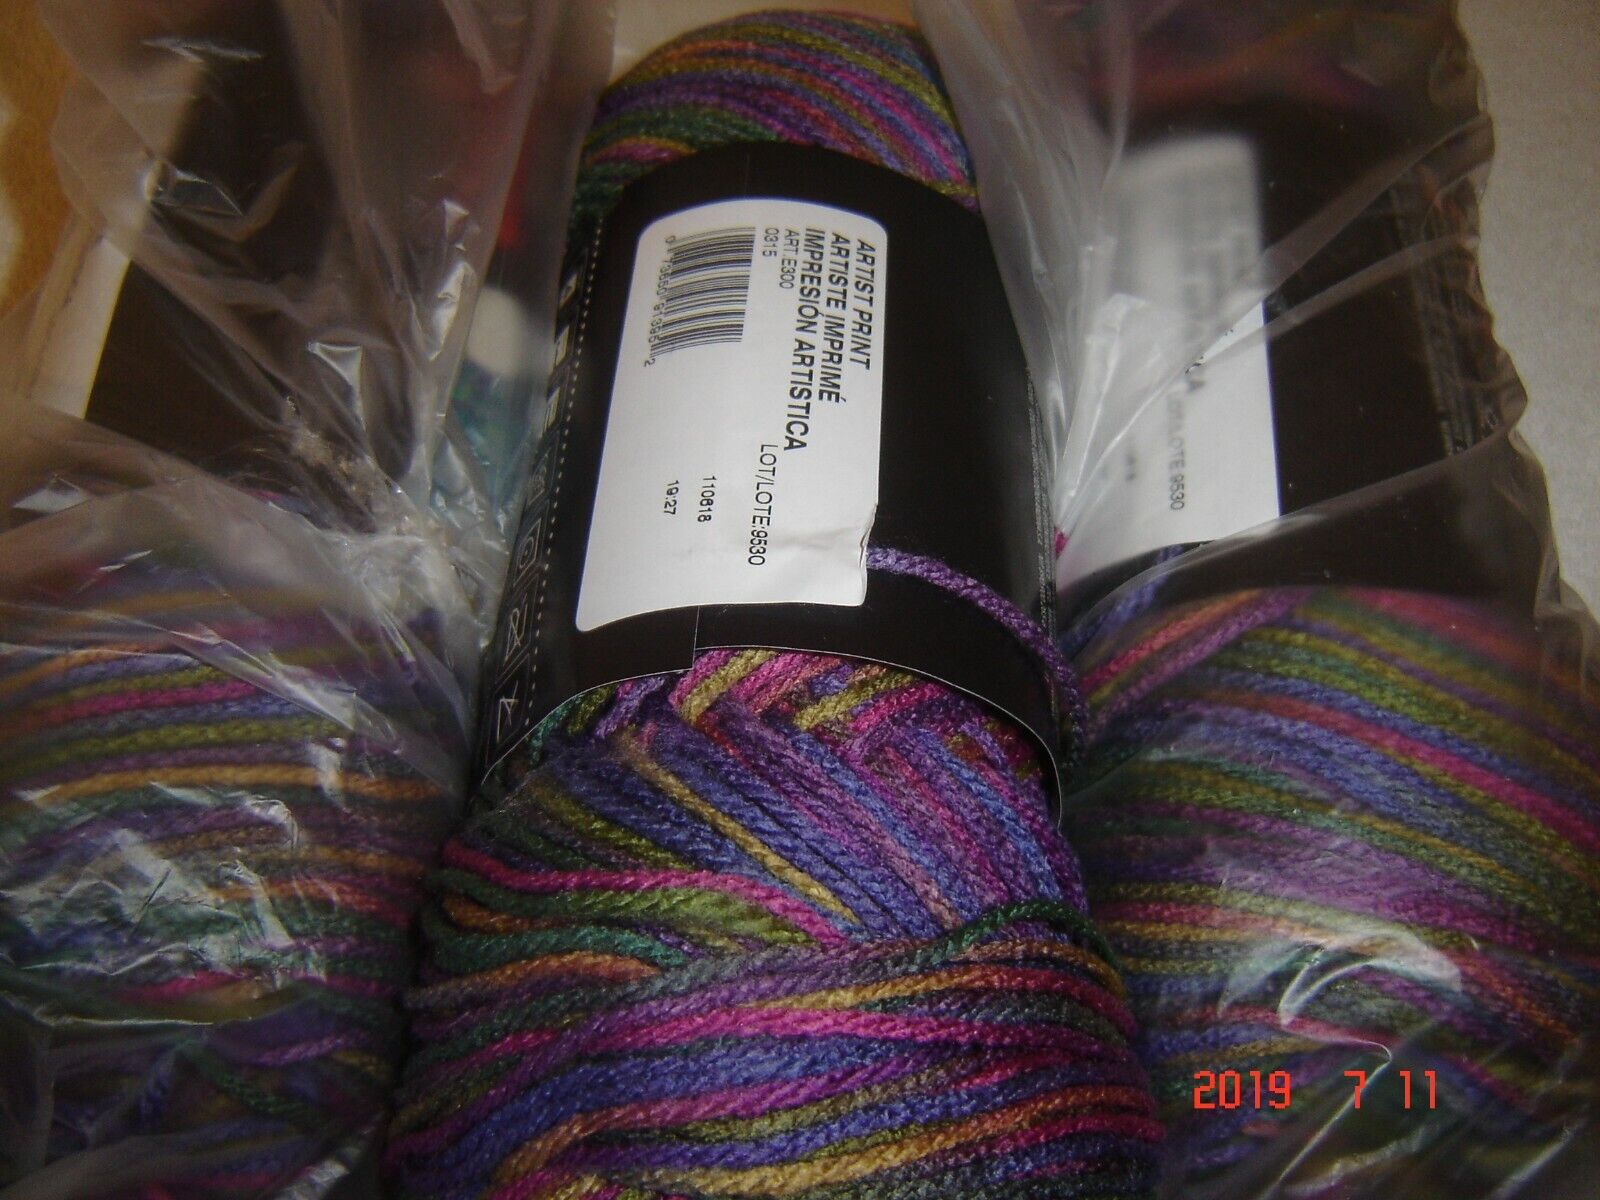  FREE SHIP  3 Skeins of Red Heart Super Saver WW Yarn in Artists Print  #0315